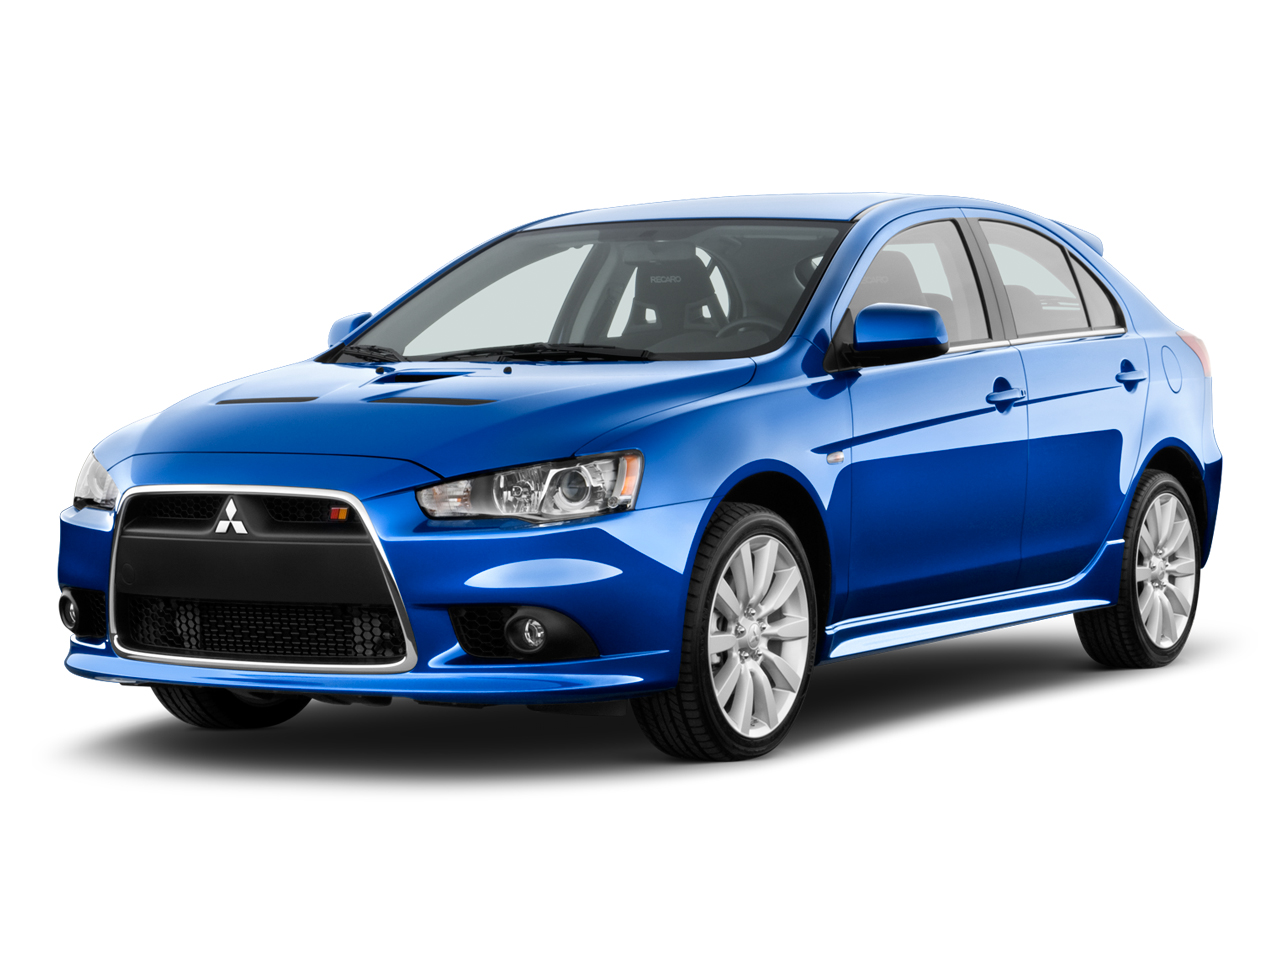 2012 Mitsubishi Lancer Review, Ratings, Specs, Prices, and Photos - The Car Connection